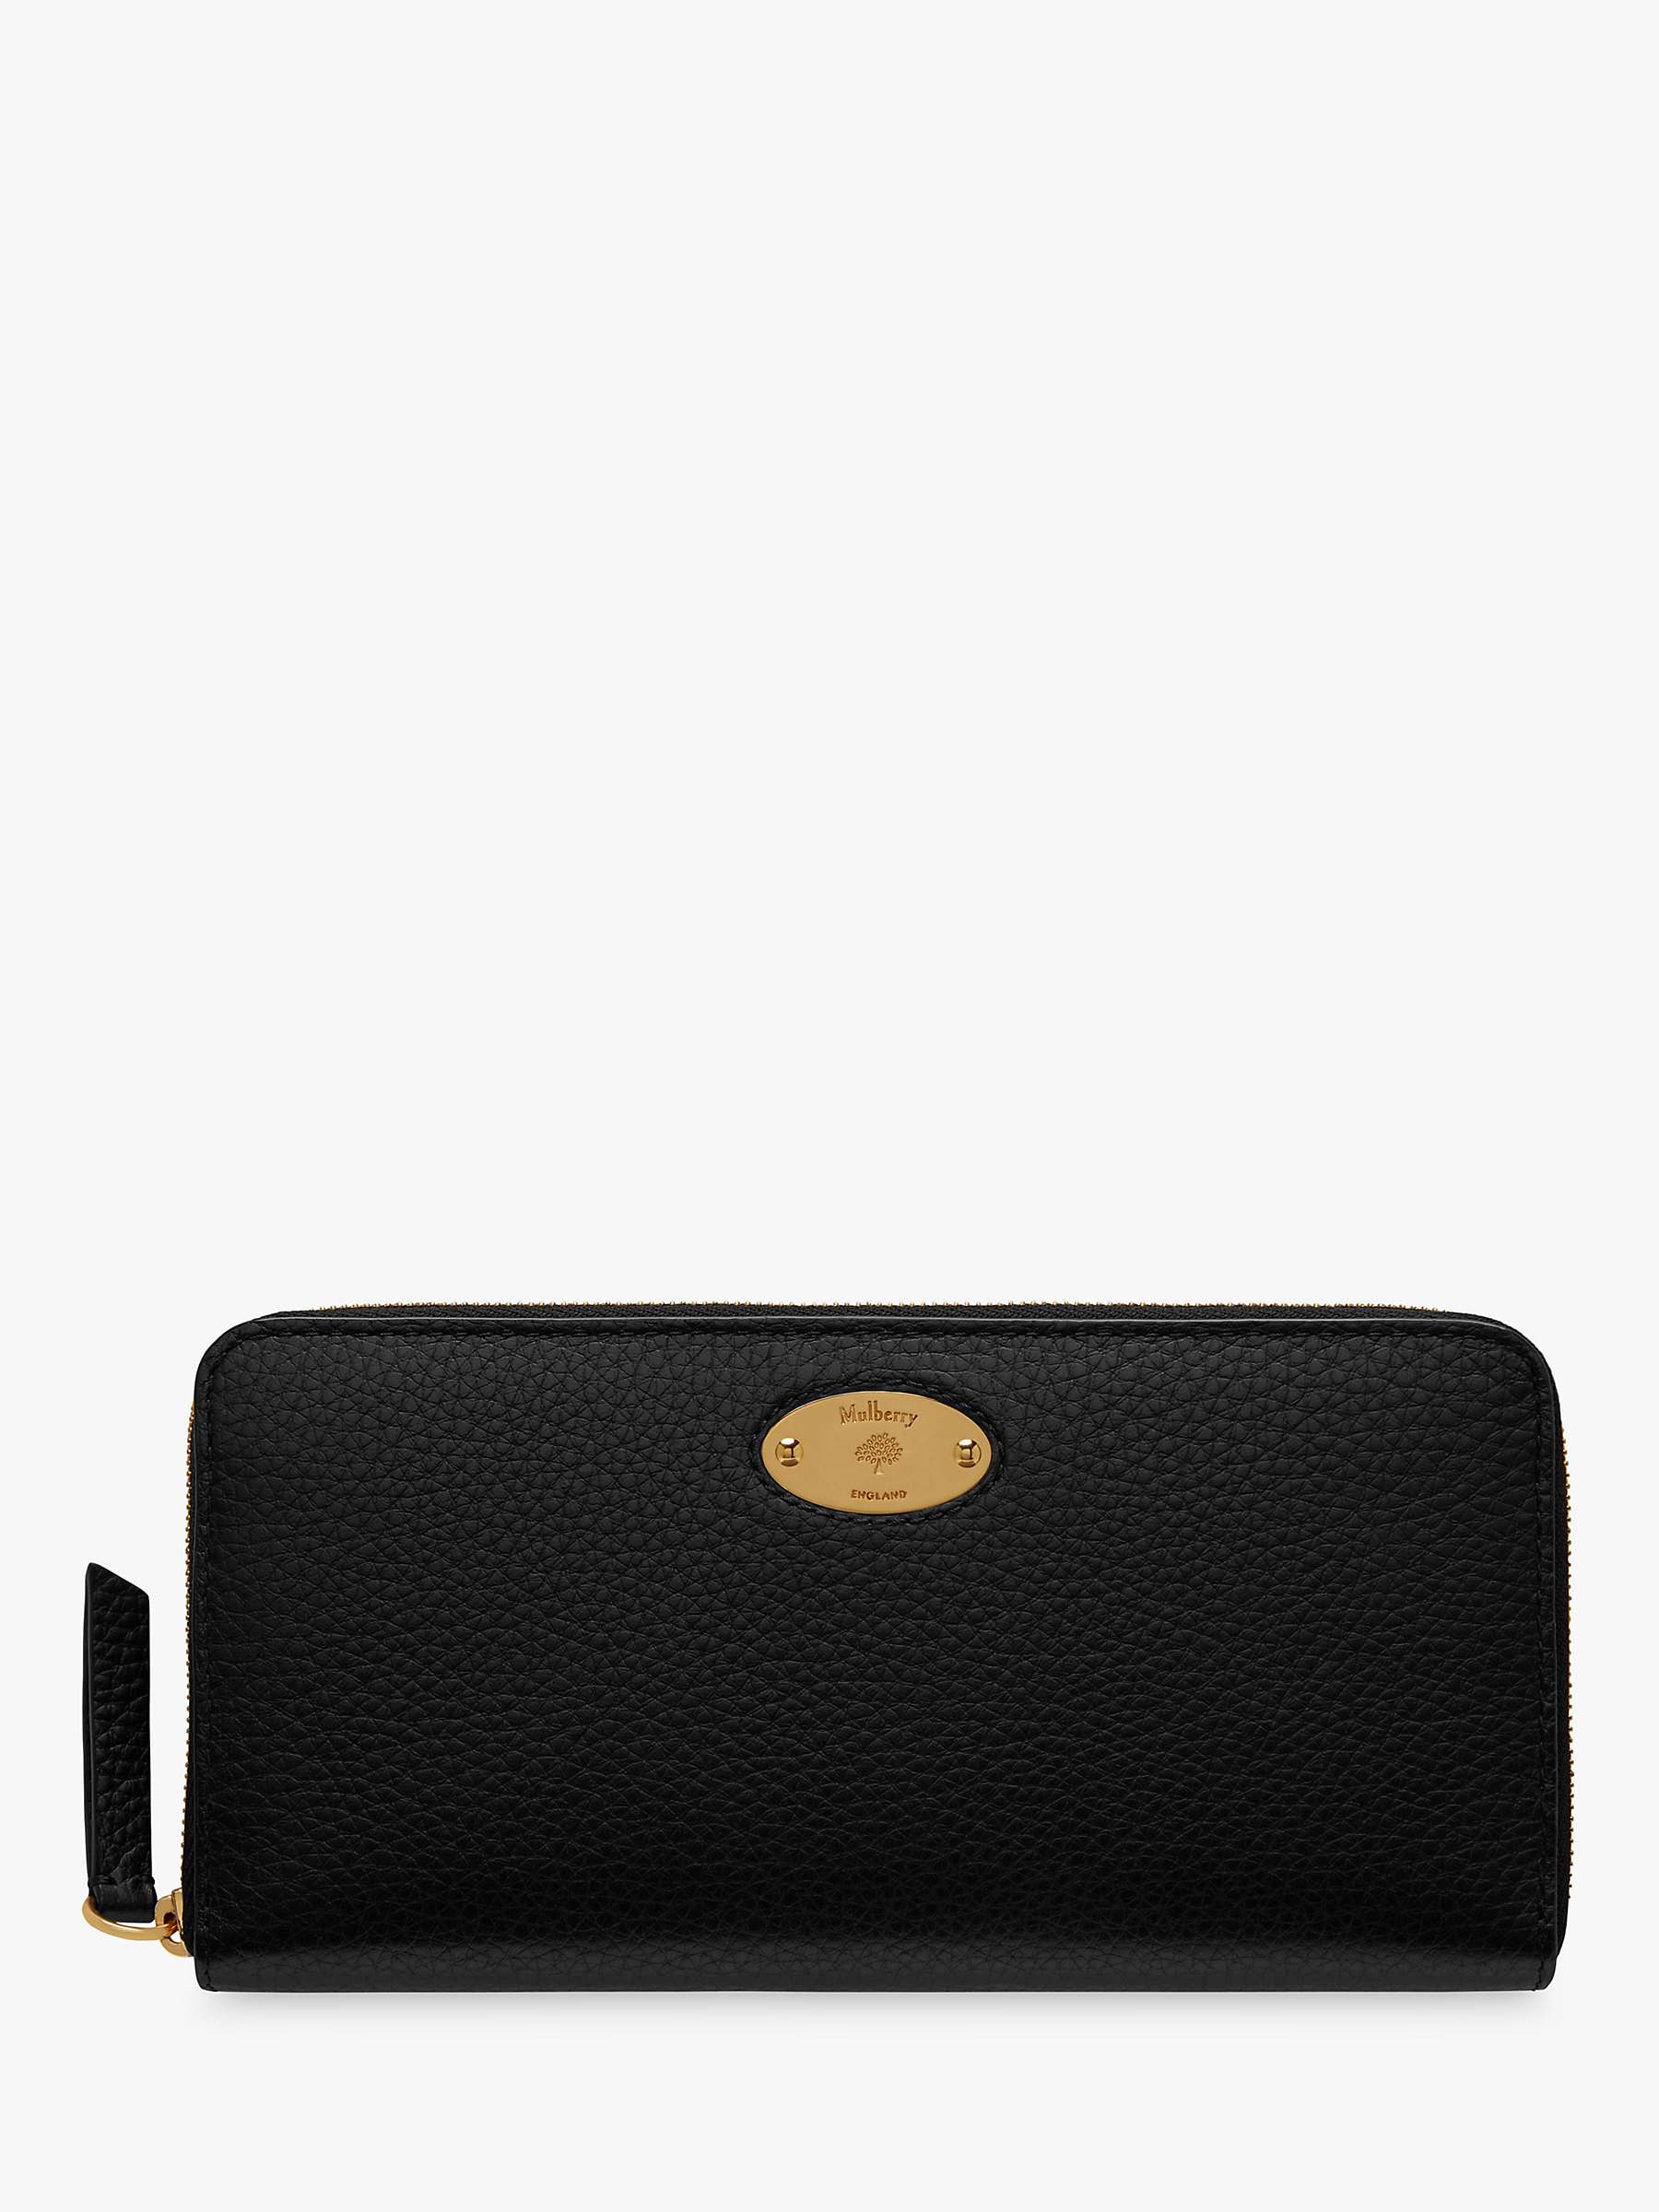 Buy Mulberry Plaque Small Classic Grain Leather 8 Card Zip Around Wallet Online at johnlewis.com